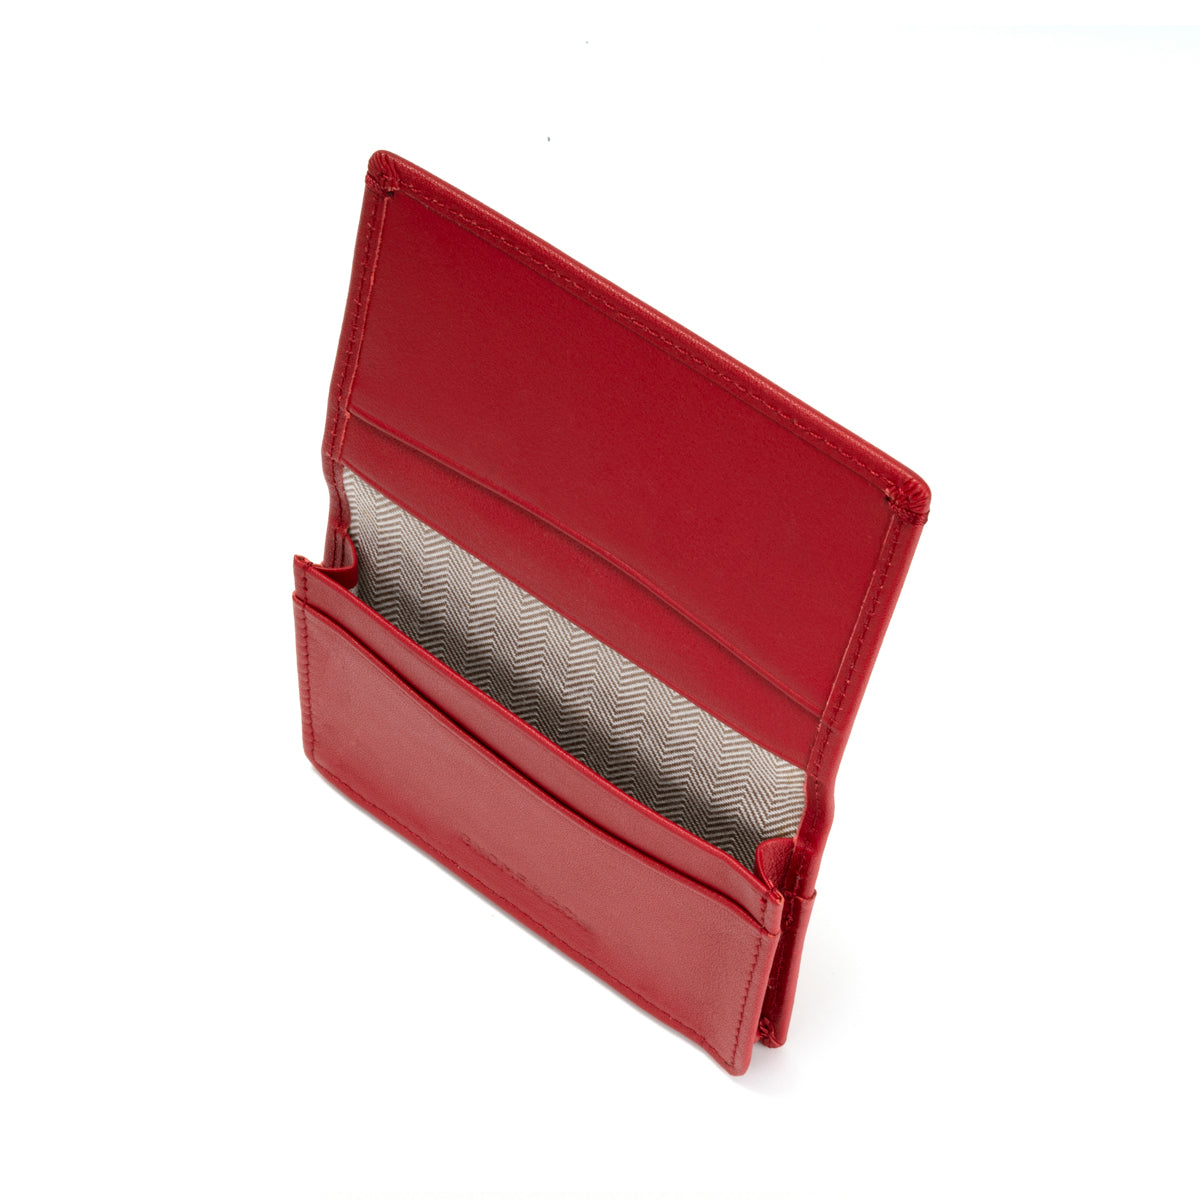 Gulliver Name Card Holder Wallet (RFID USA Nappa Leather)